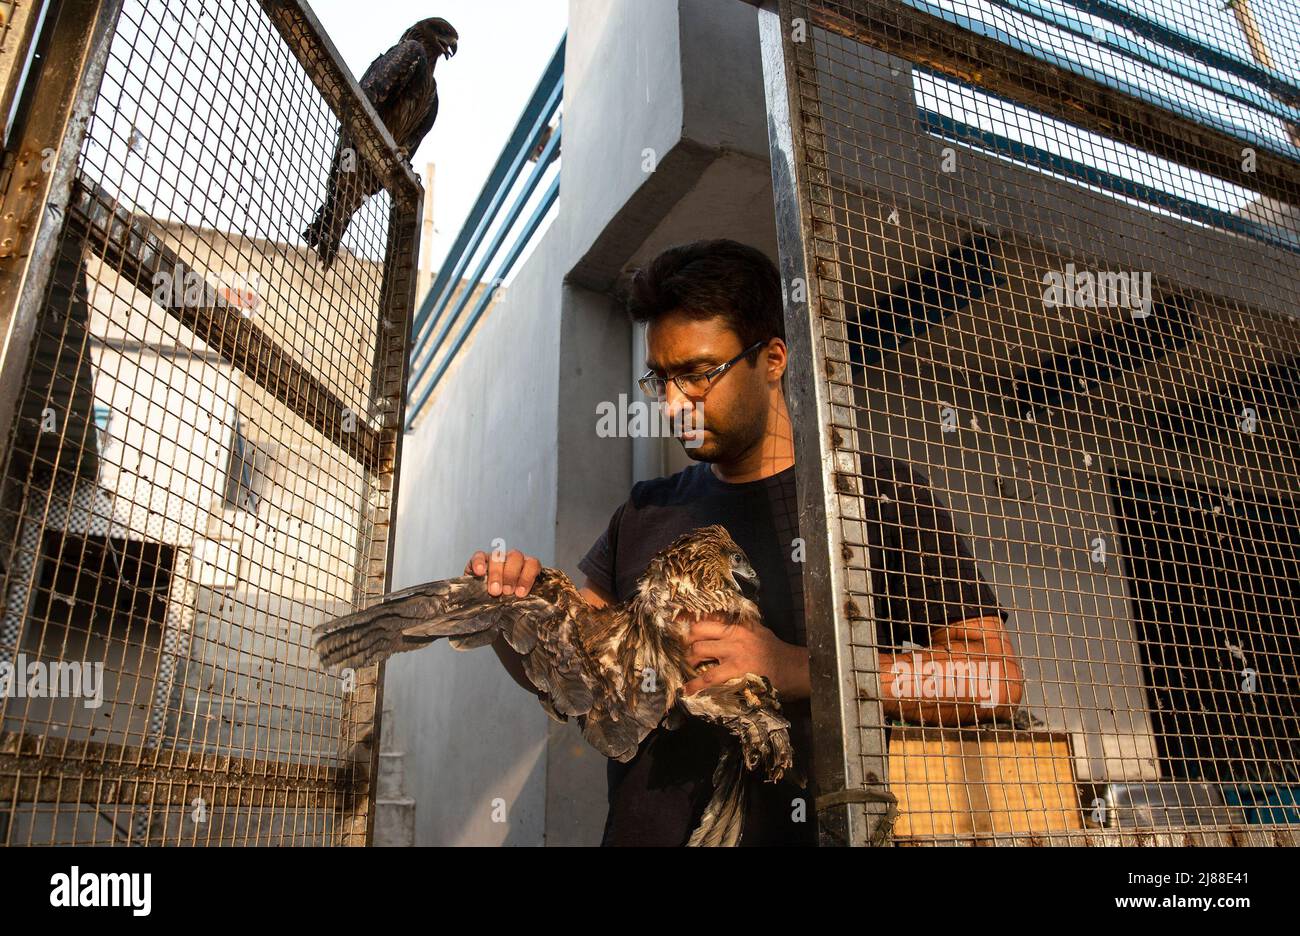 New Delhi, India. 13th May, 2022. A raptor rescuer inspects an injured black kite at his clinic in New Delhi, India, May 13, 2022. Two brothers -Saud and Shehzad -in New Delhi have embarked on the mission to save injured raptors. They have been treating the injured birds at their clinic in Wazirabad, New Delhi. Last year they say they saved 2500 birds and since the beginning of this year over 1300 birds have been treated at their clinic. Credit: Javed Dar/Xinhua/Alamy Live News Stock Photo